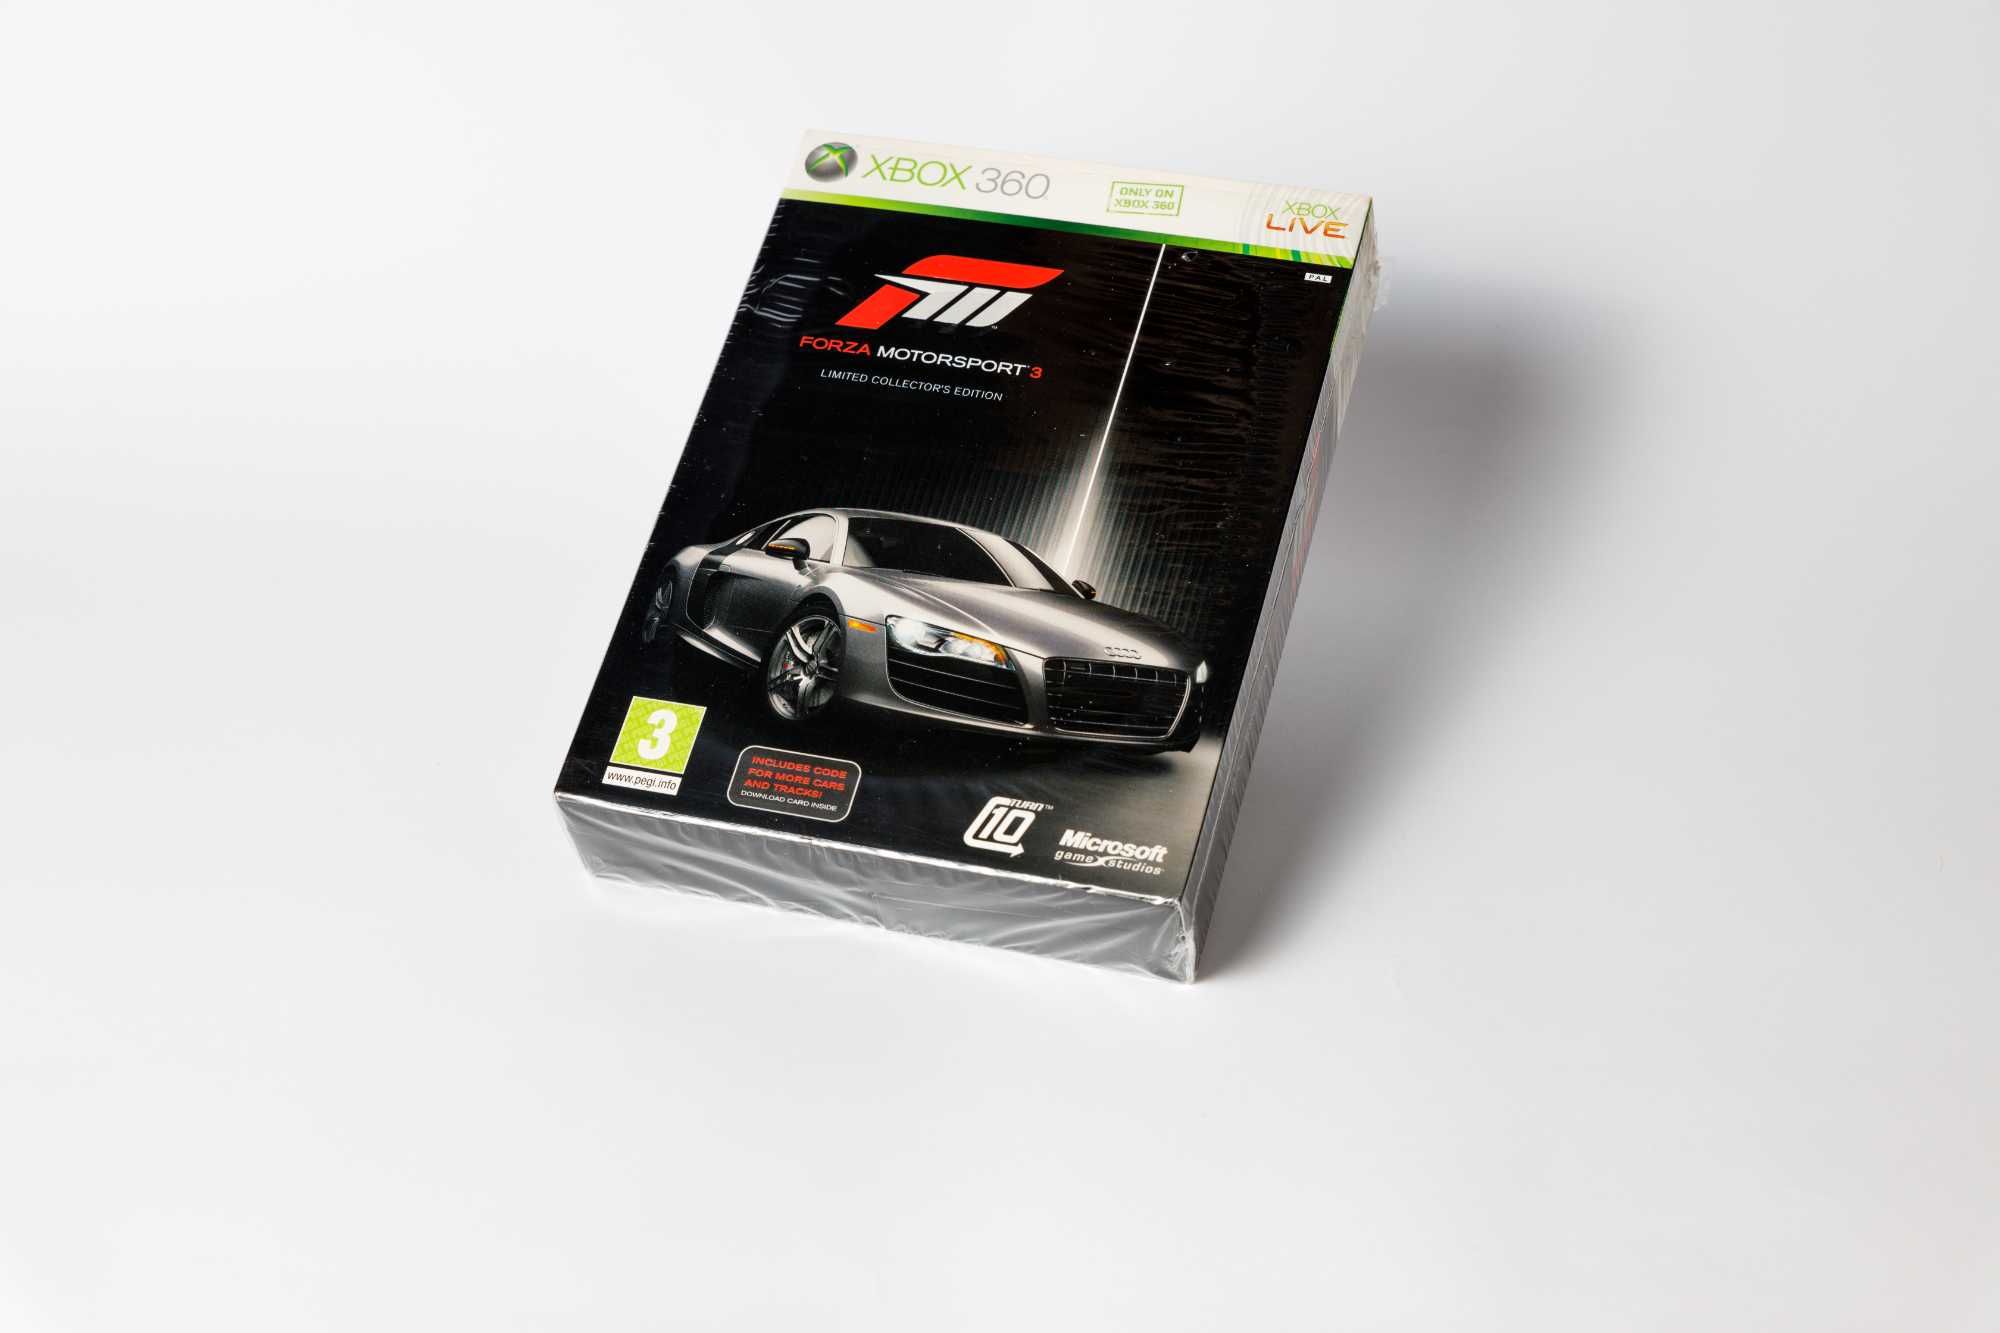 Forza Motorsport 3 Limited Collector's Edition